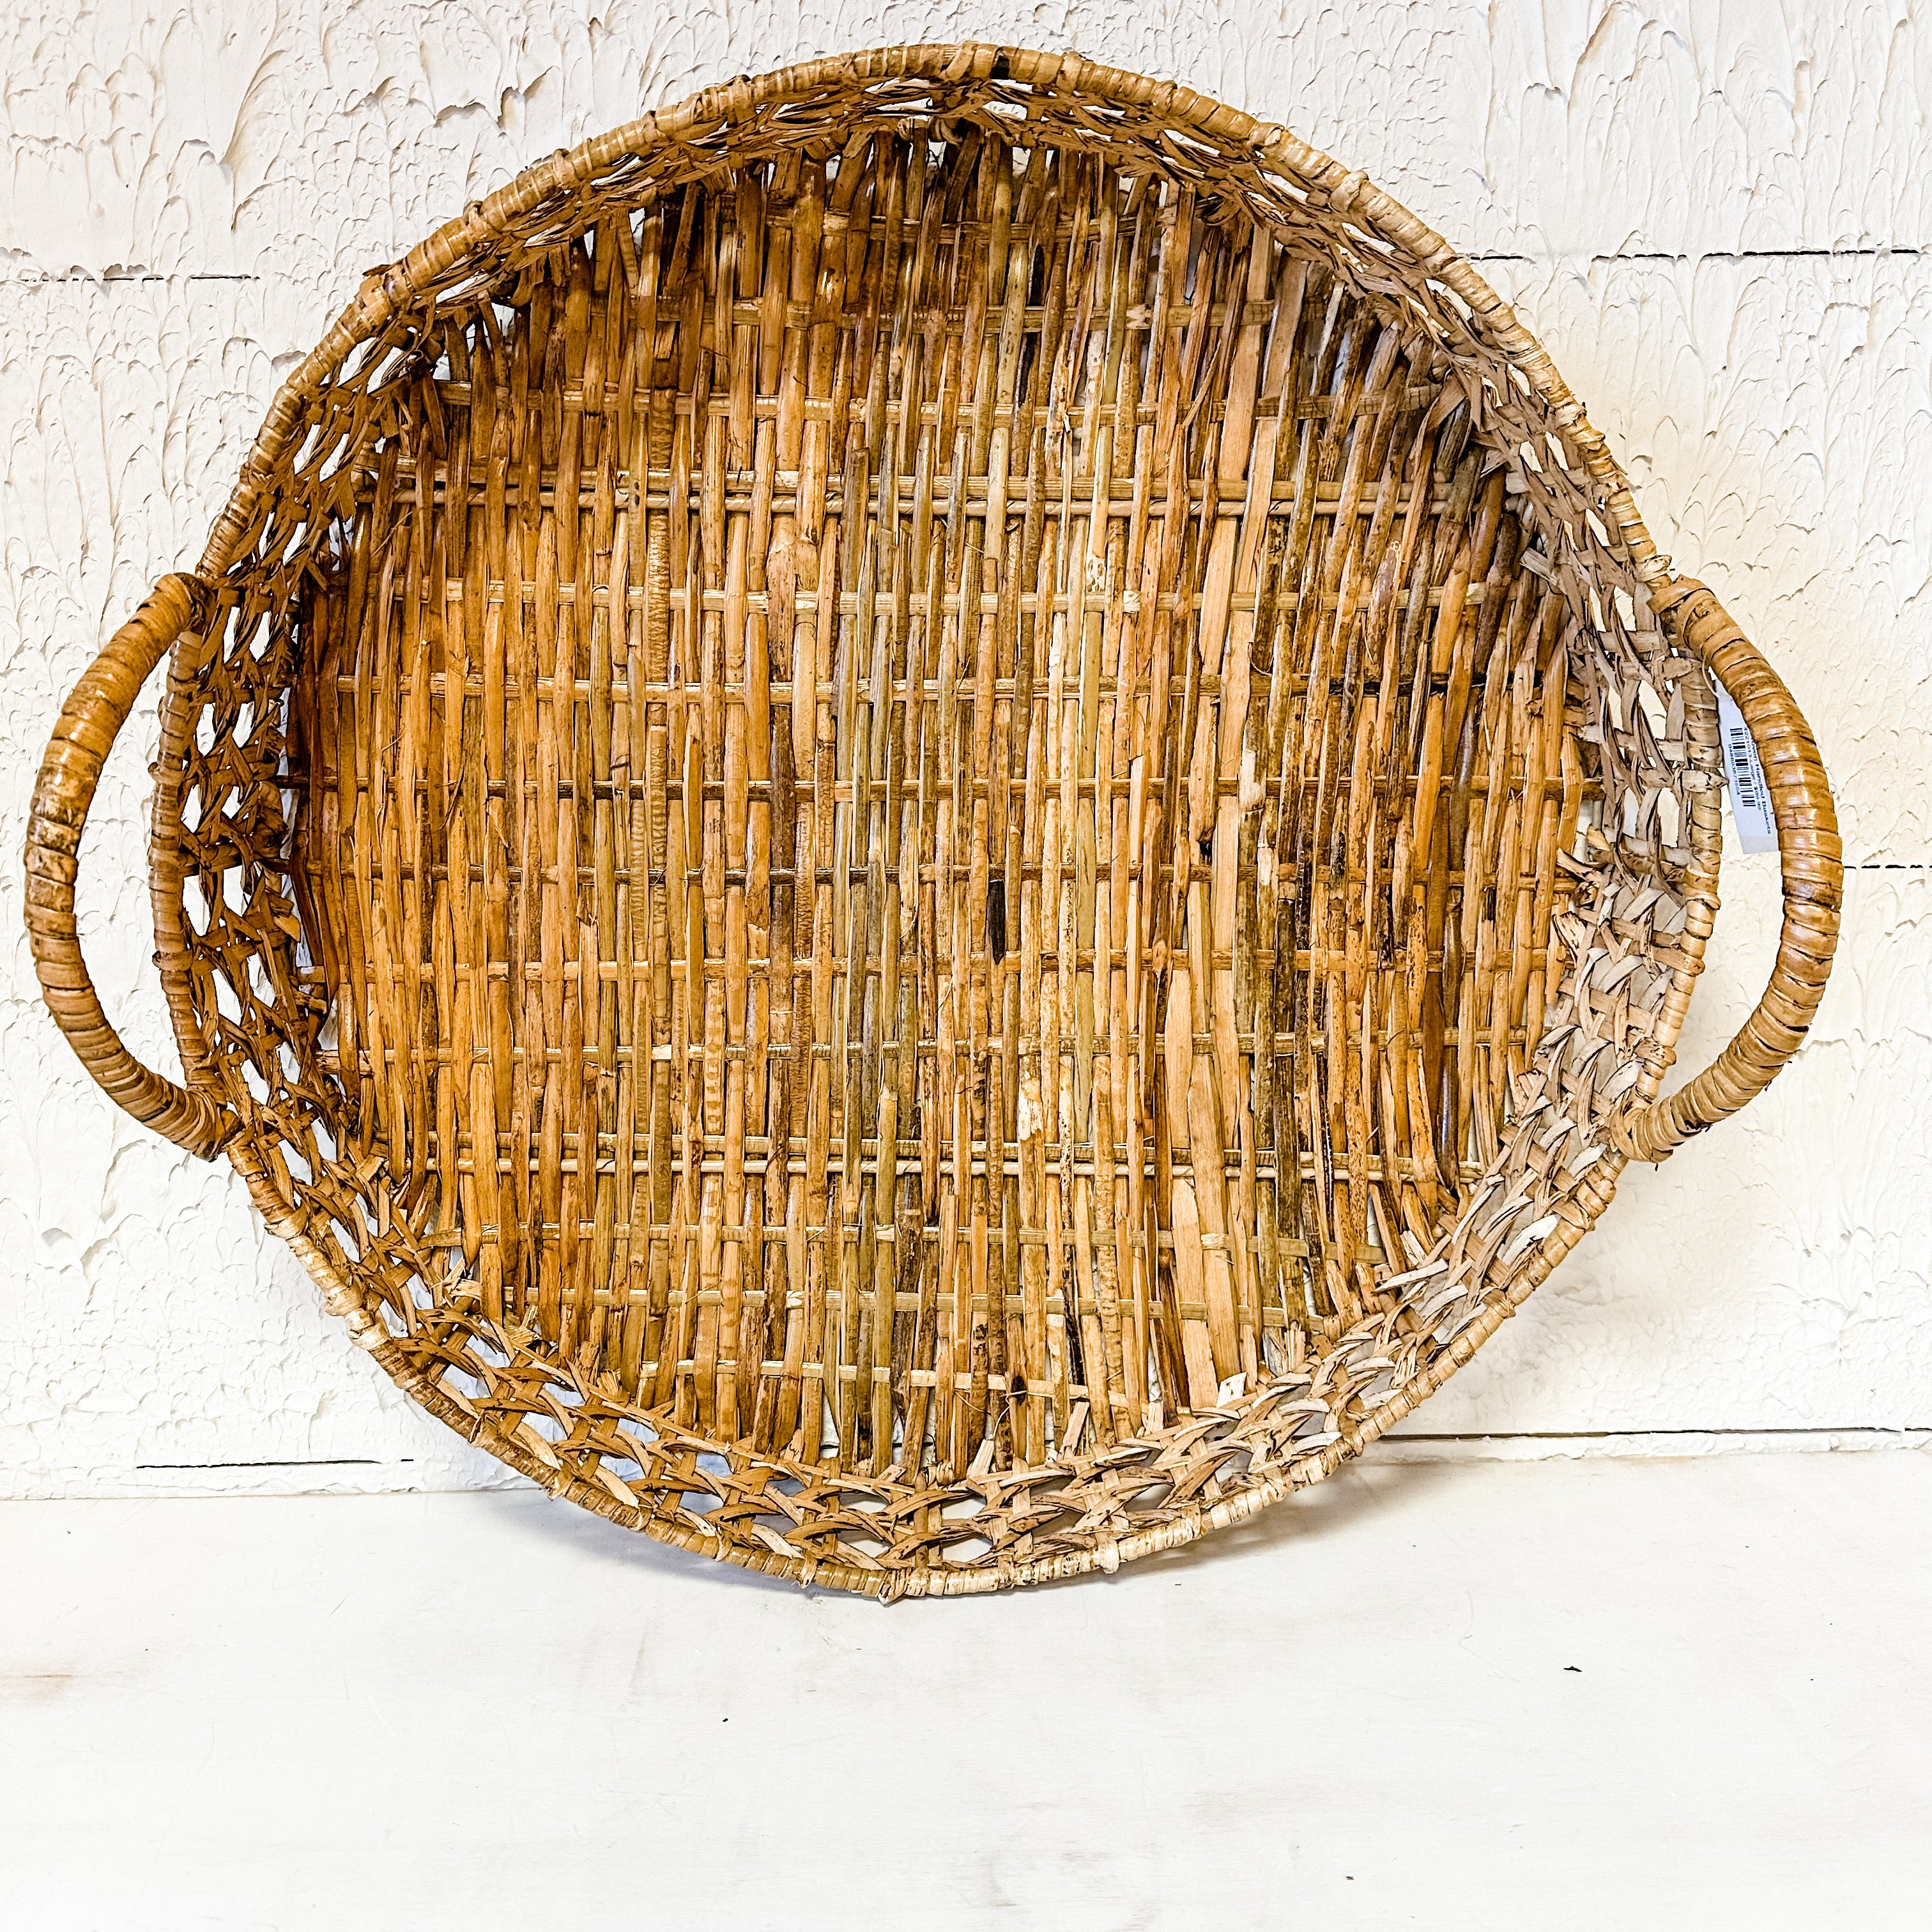 Round Woven Handled Baskets